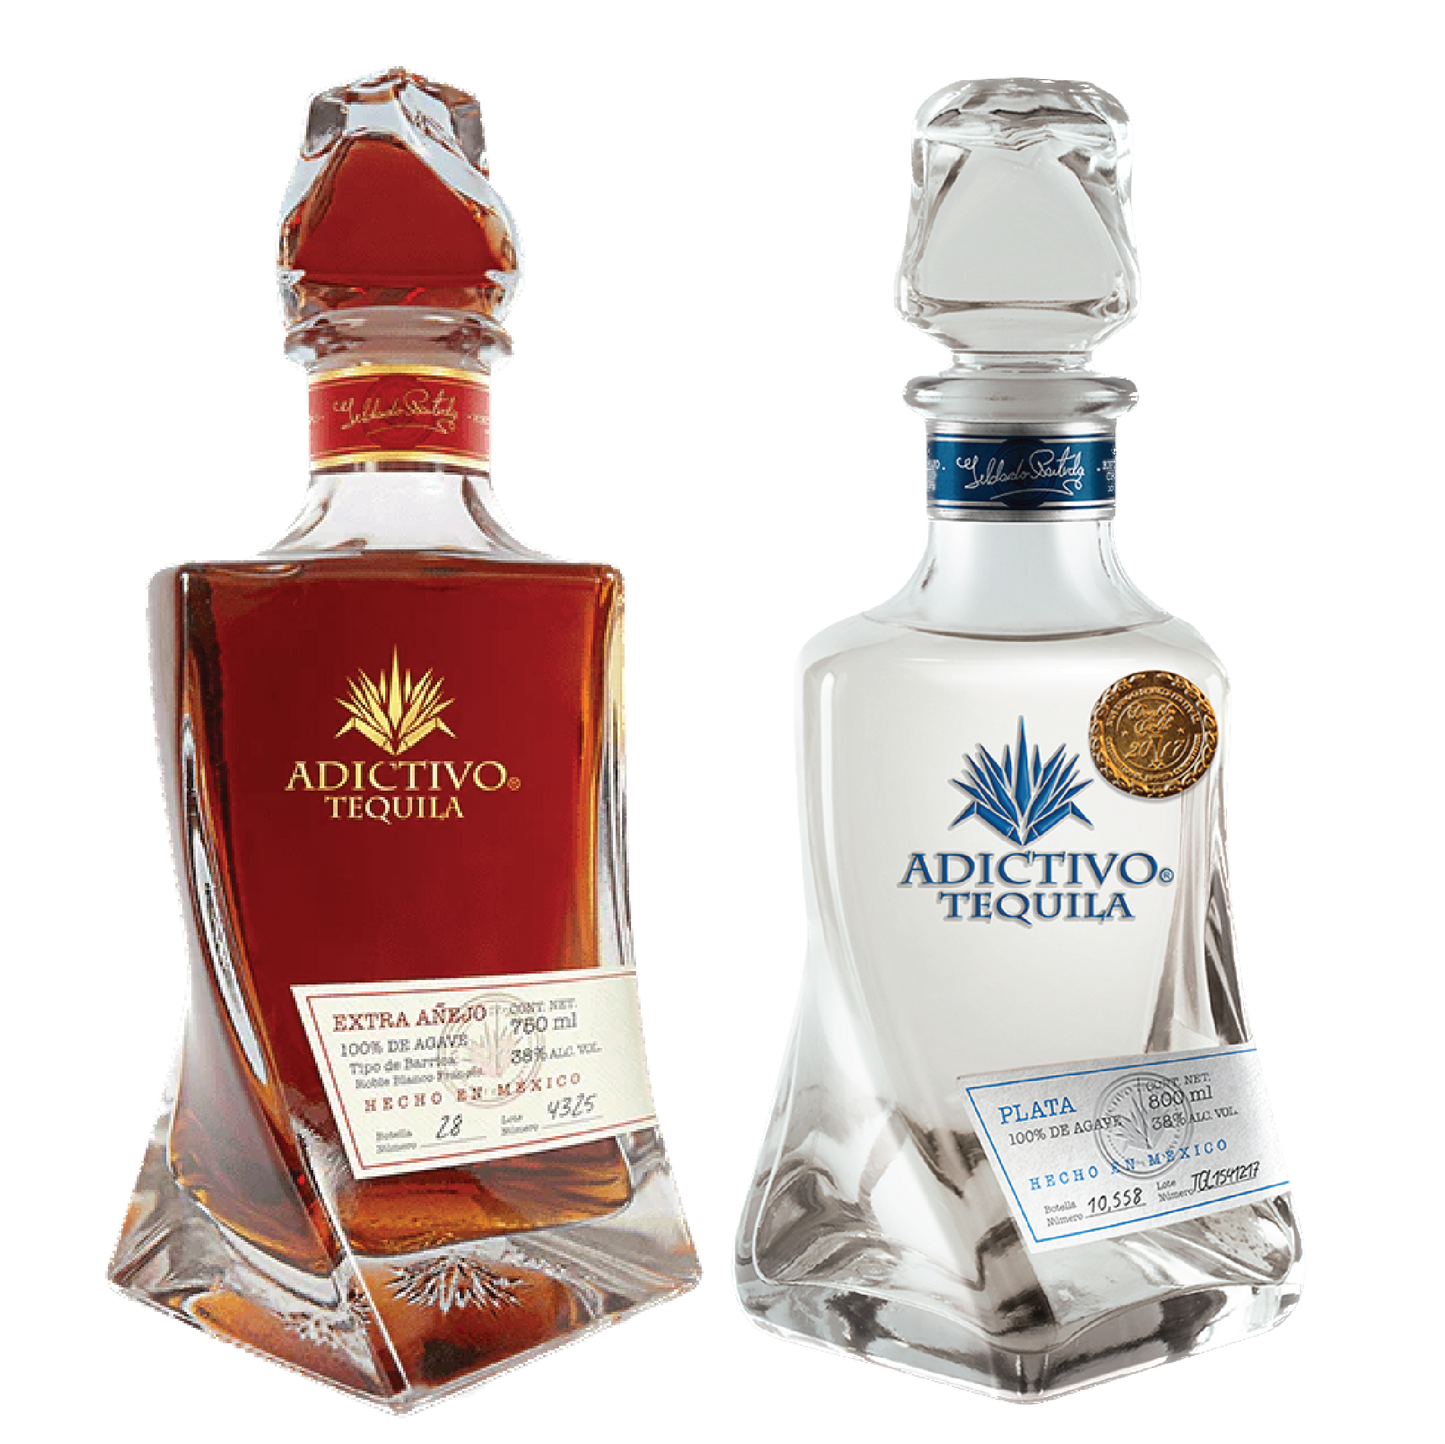 Adictivo Tequila Package